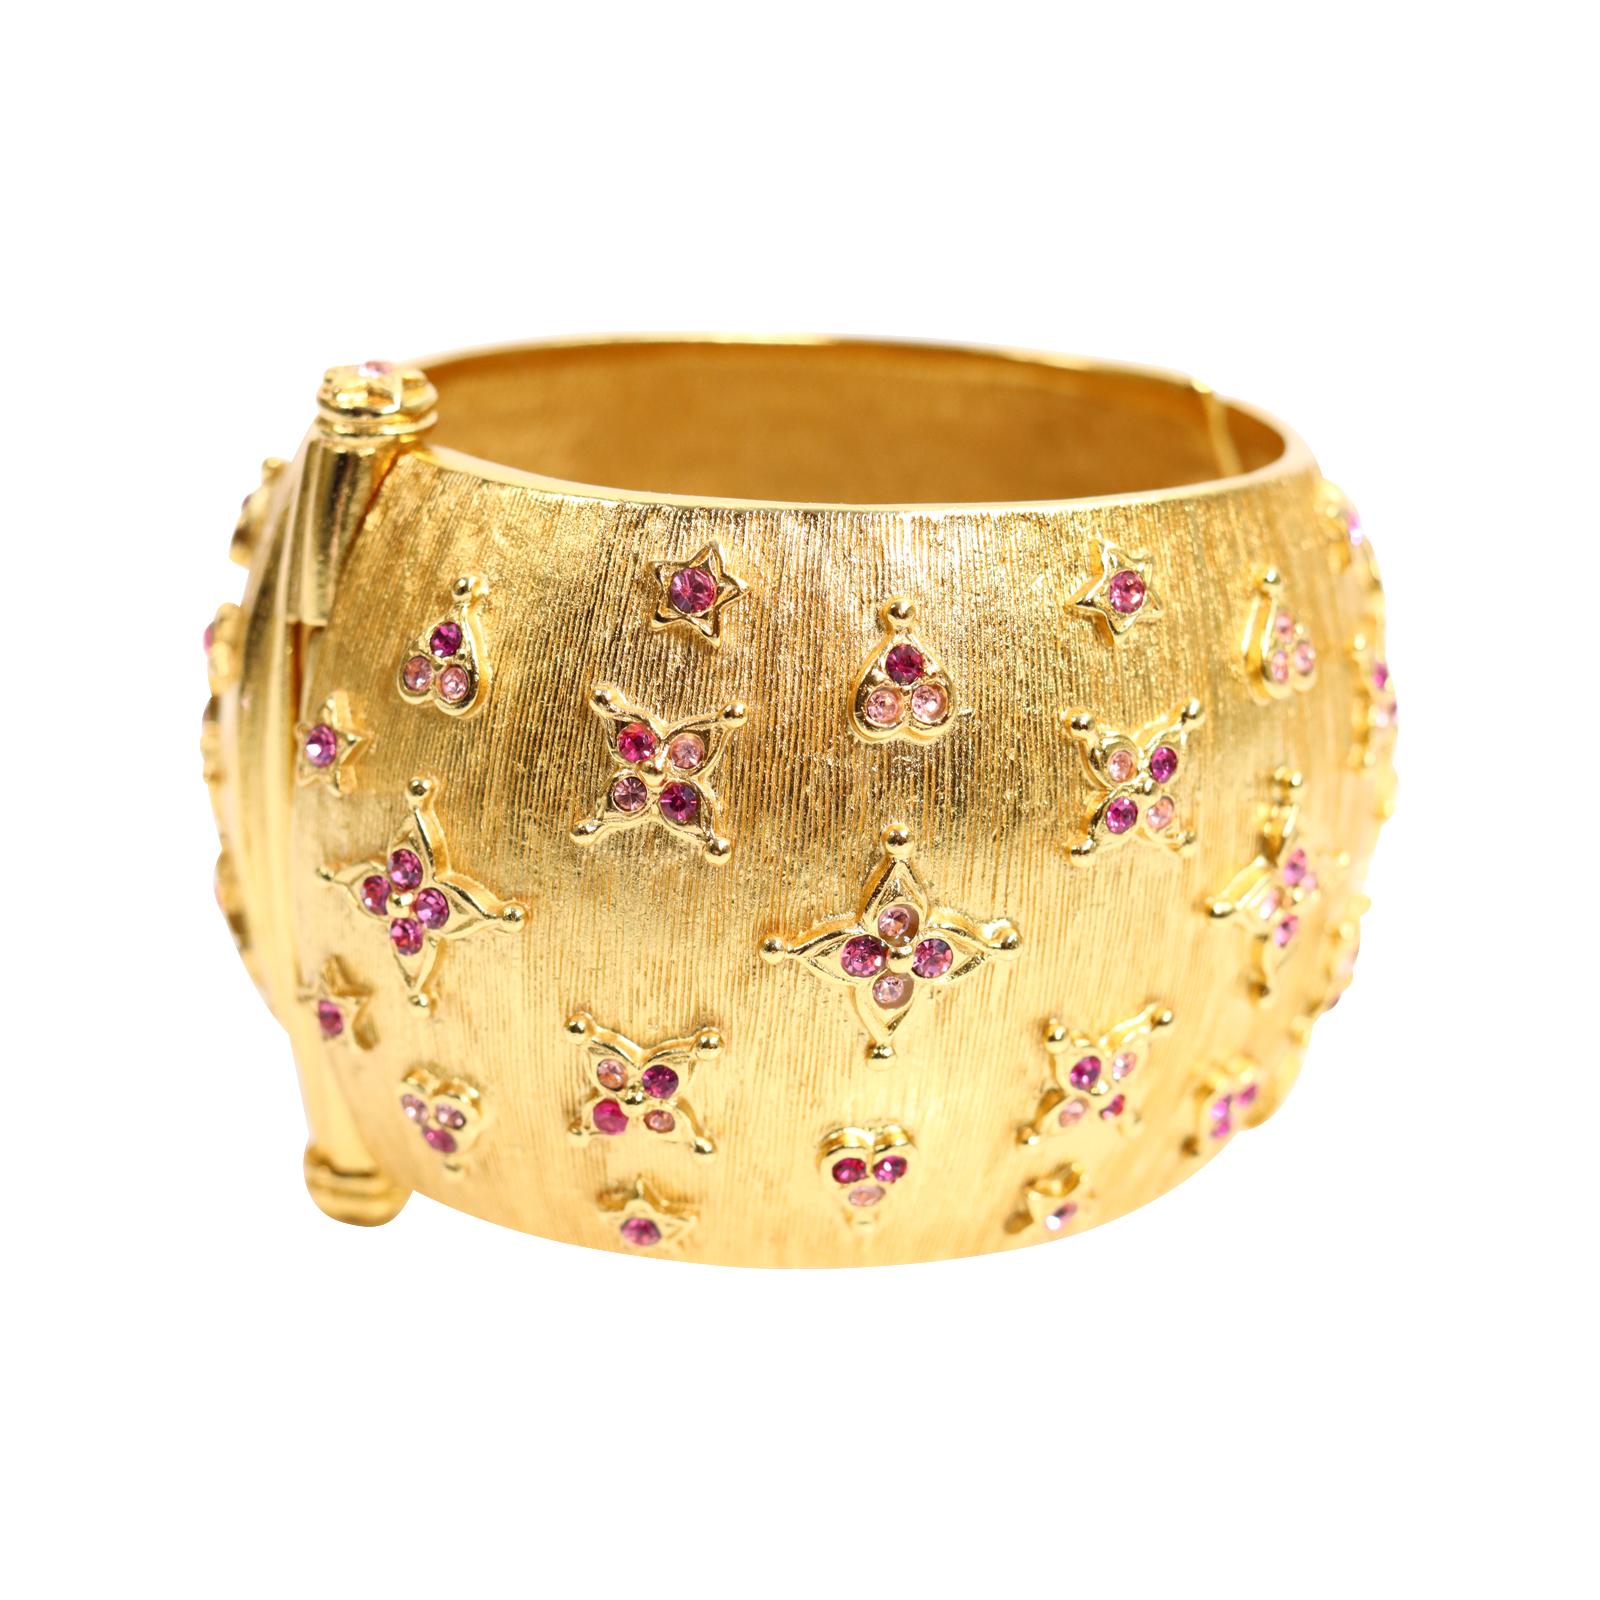 Women's or Men's Vintage Maison Goossens for YSL Gold Bracelet with Pink Crystals Circa 1980s For Sale